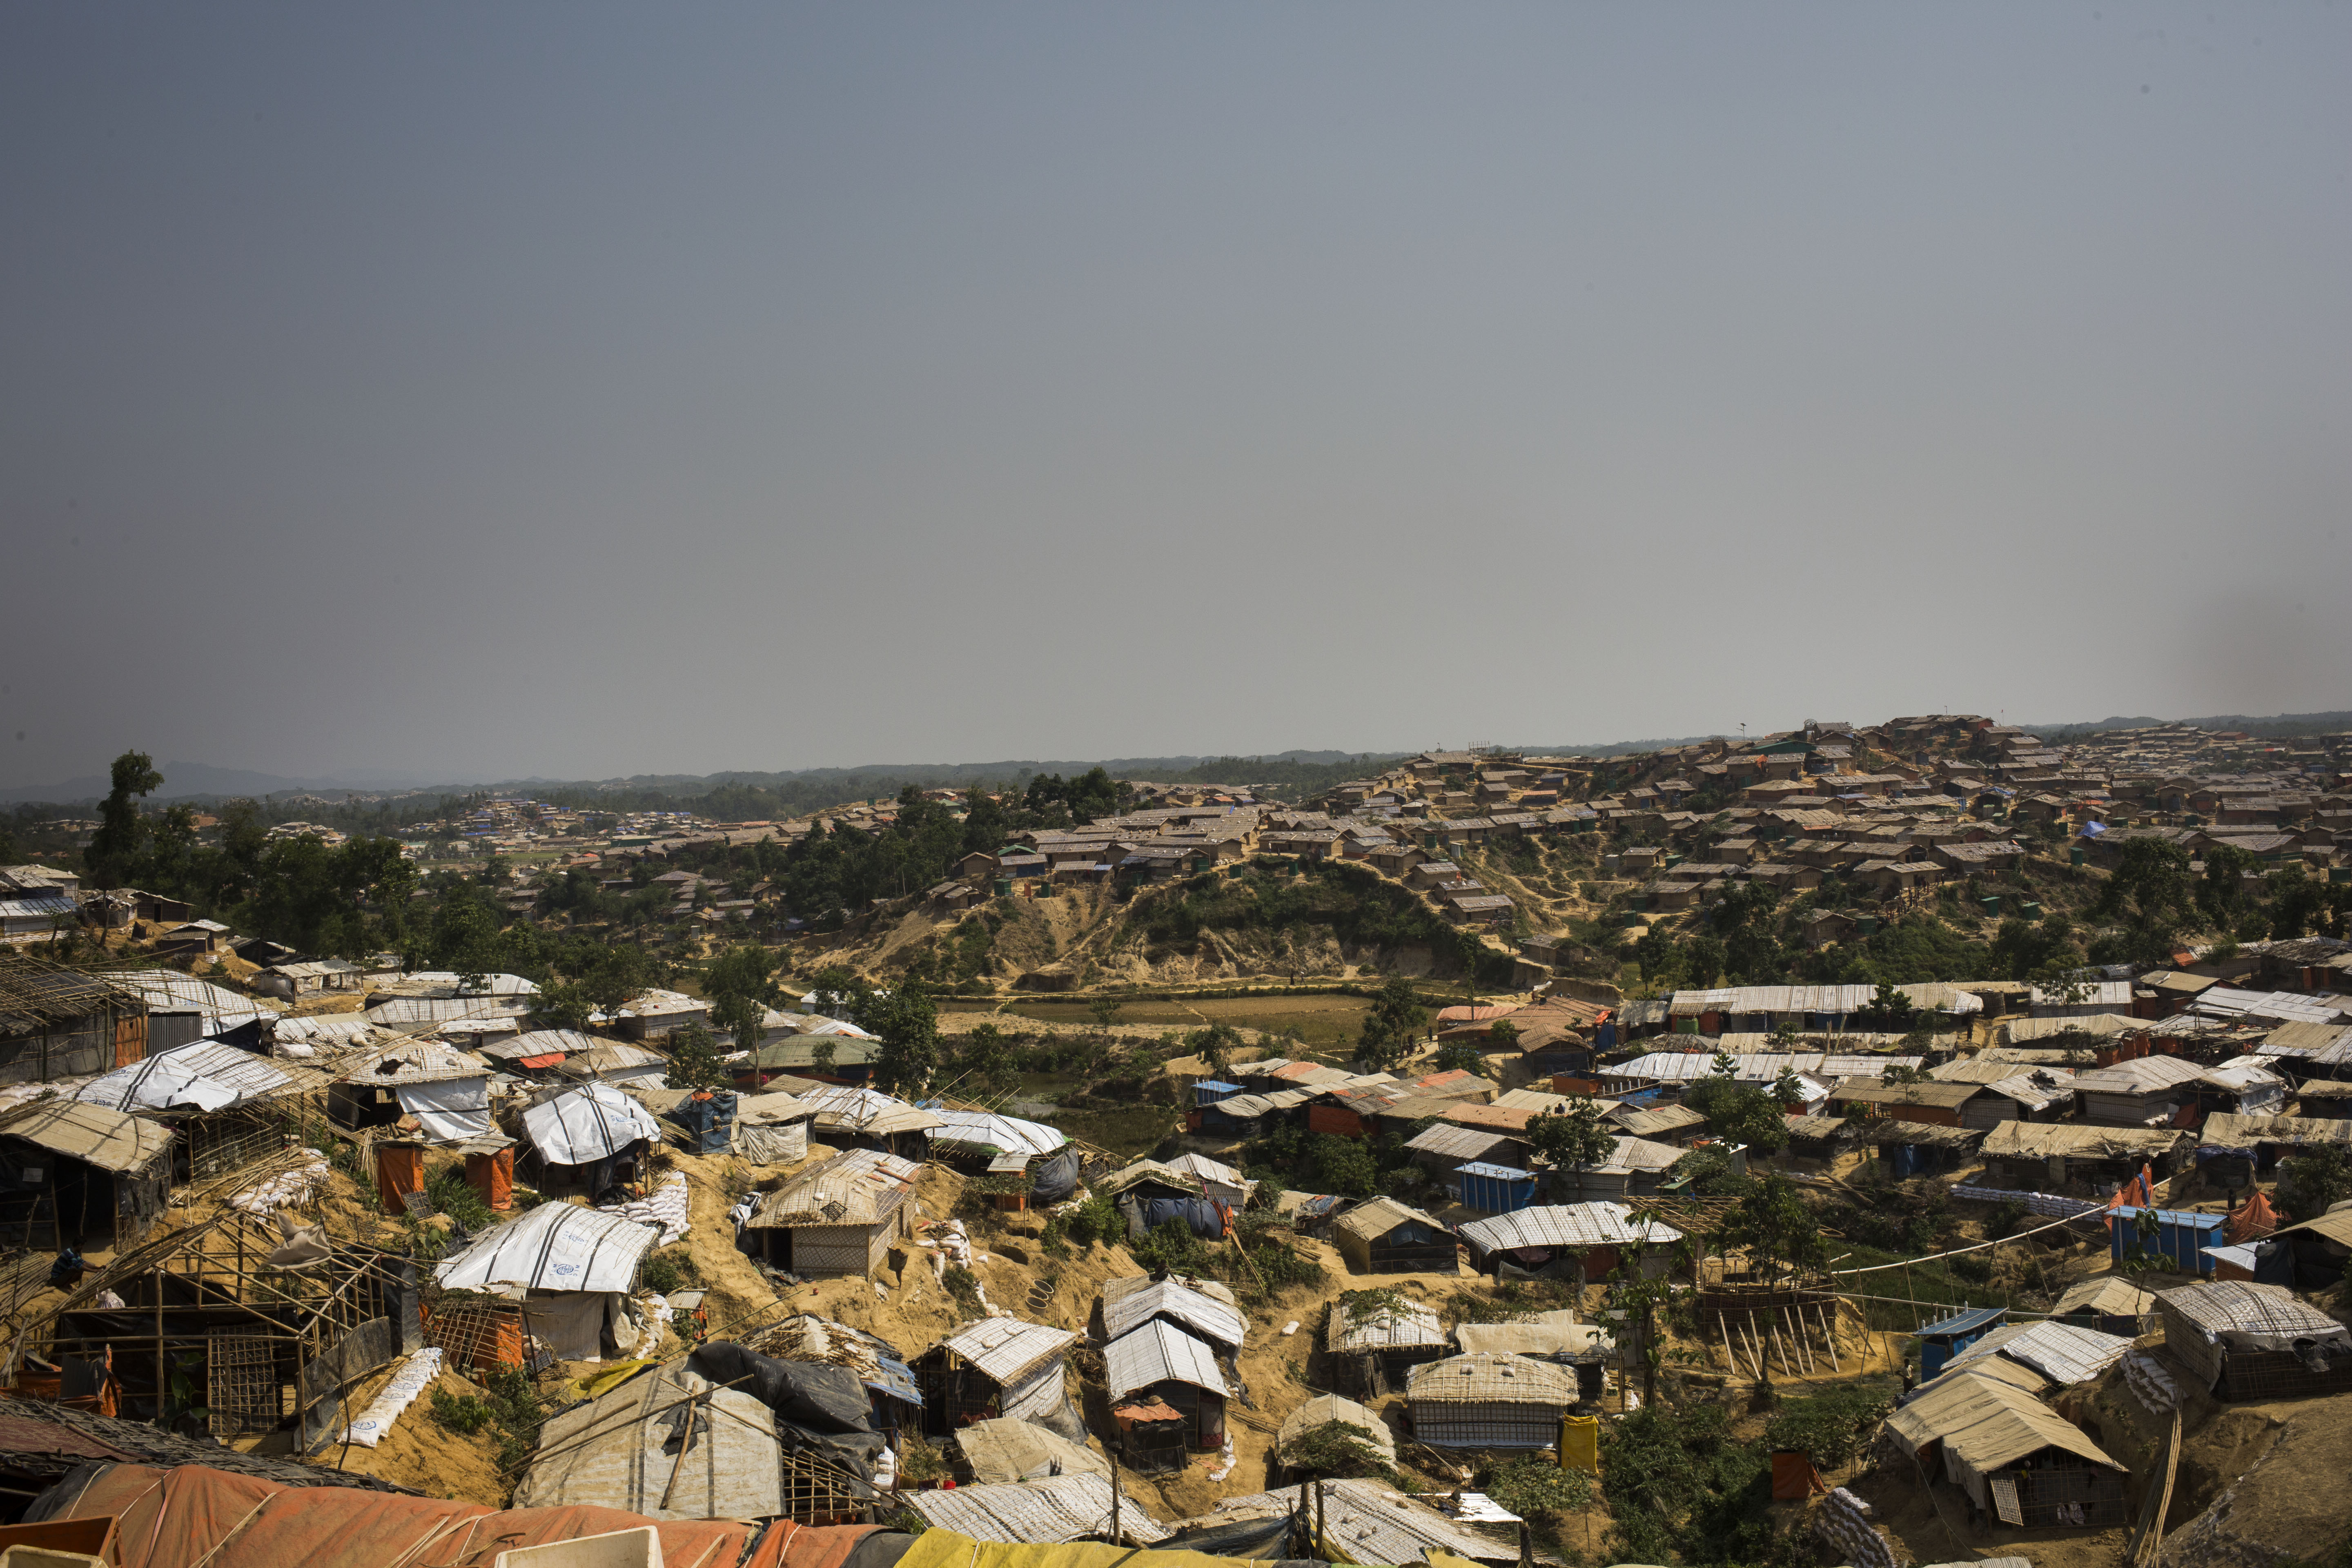 Kutupalong-Balukhali is now the largest refugee camp in the world, home to 600,000 people. People live in cramped conditions on precarious slopes. The camp stretches as far as the eye can see.